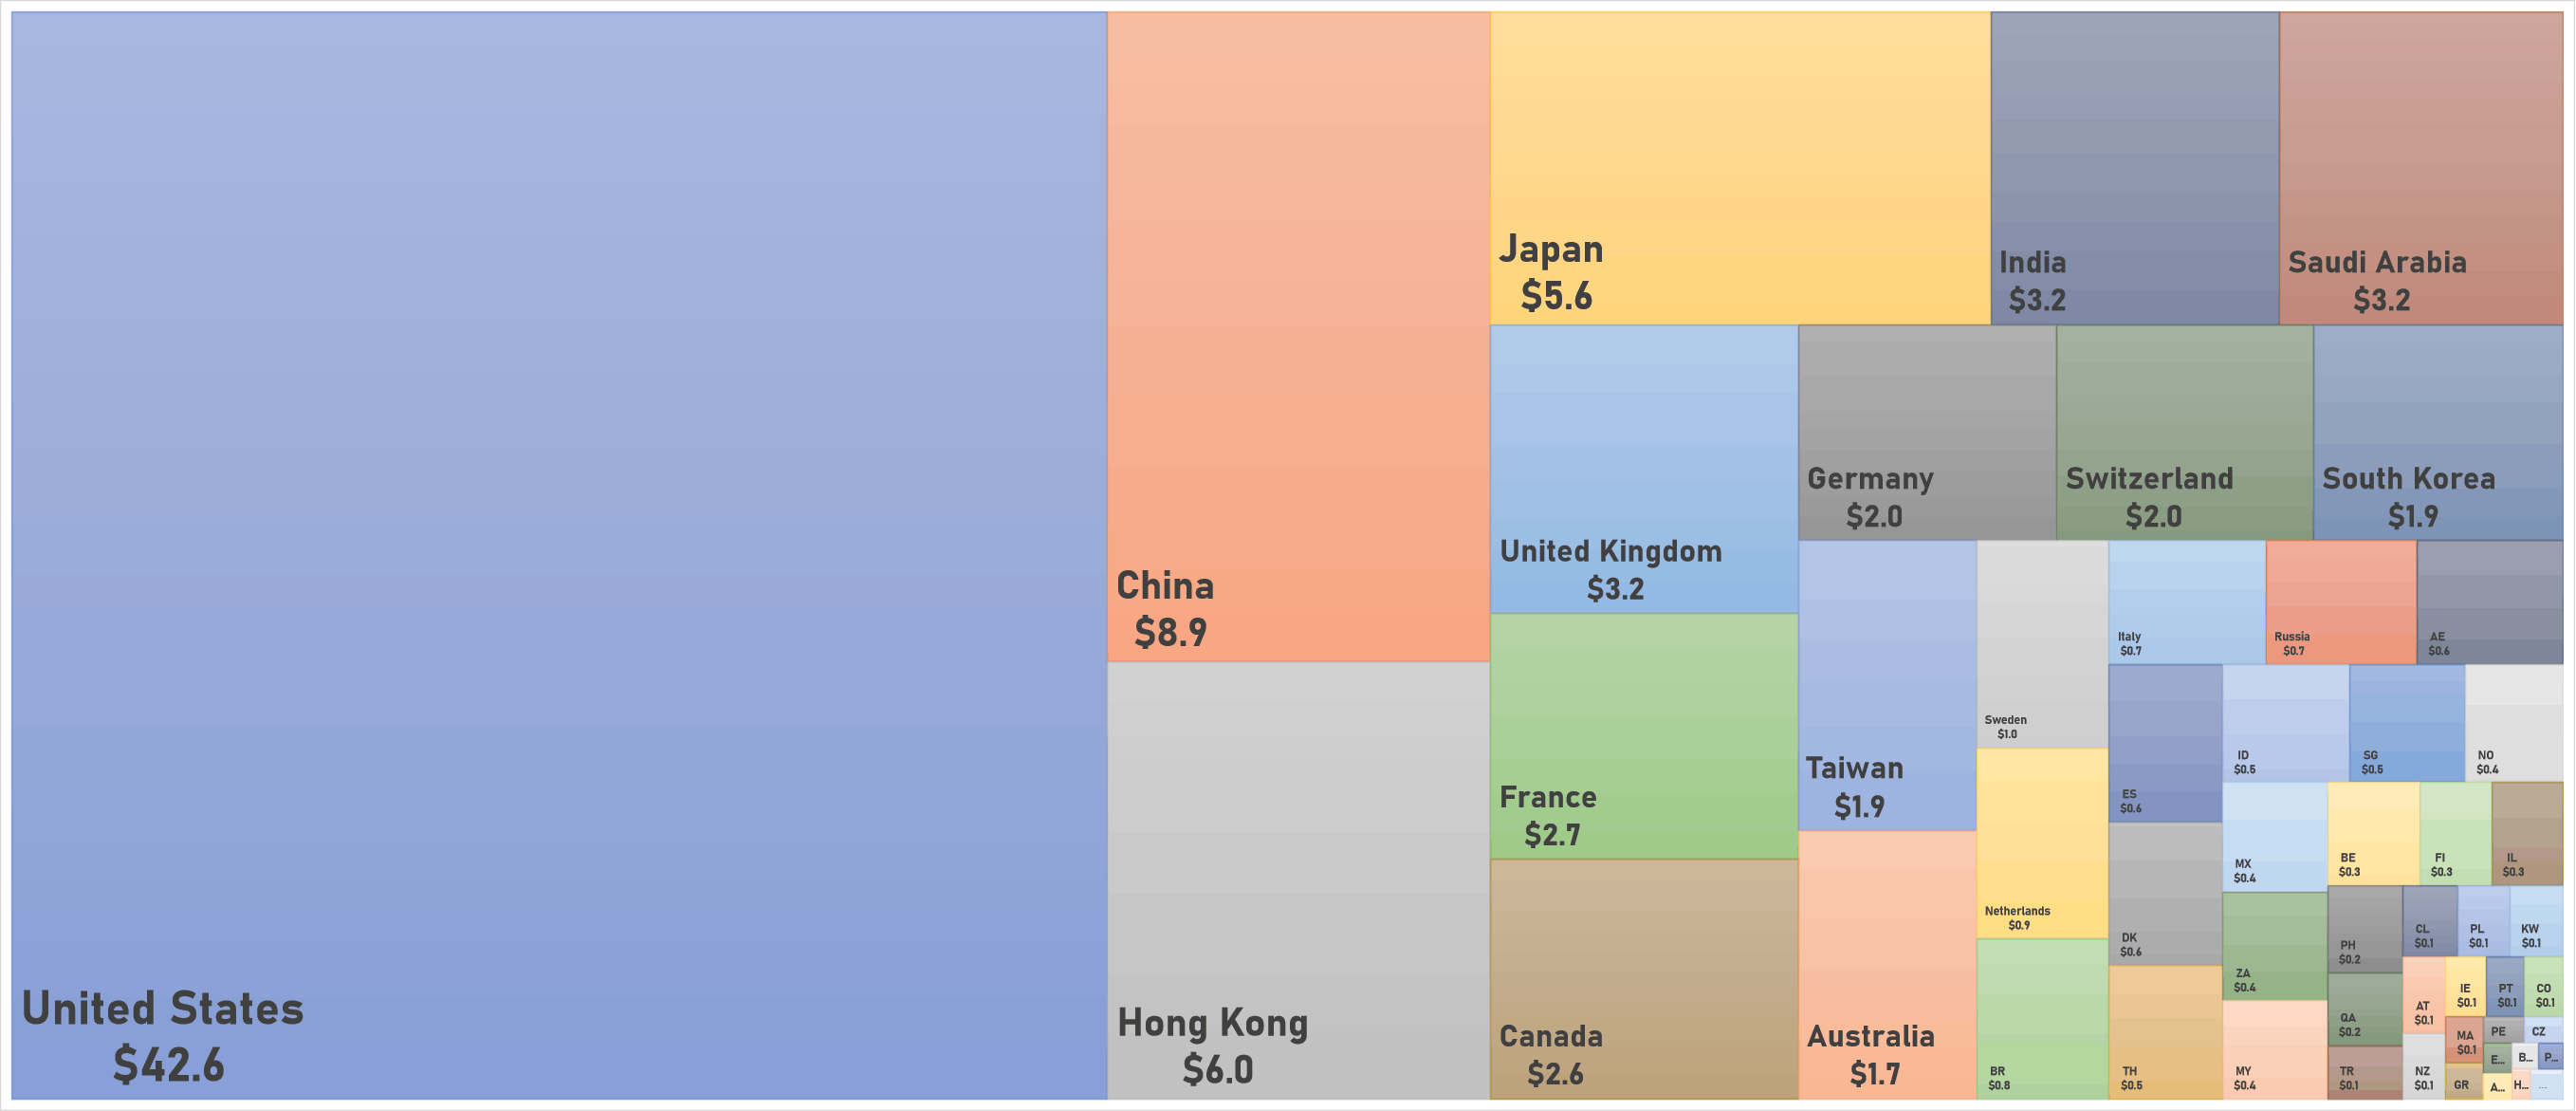 World Market Cap In USD Trillion Broken Down By Country | Sources: phipost.com, FactSet data